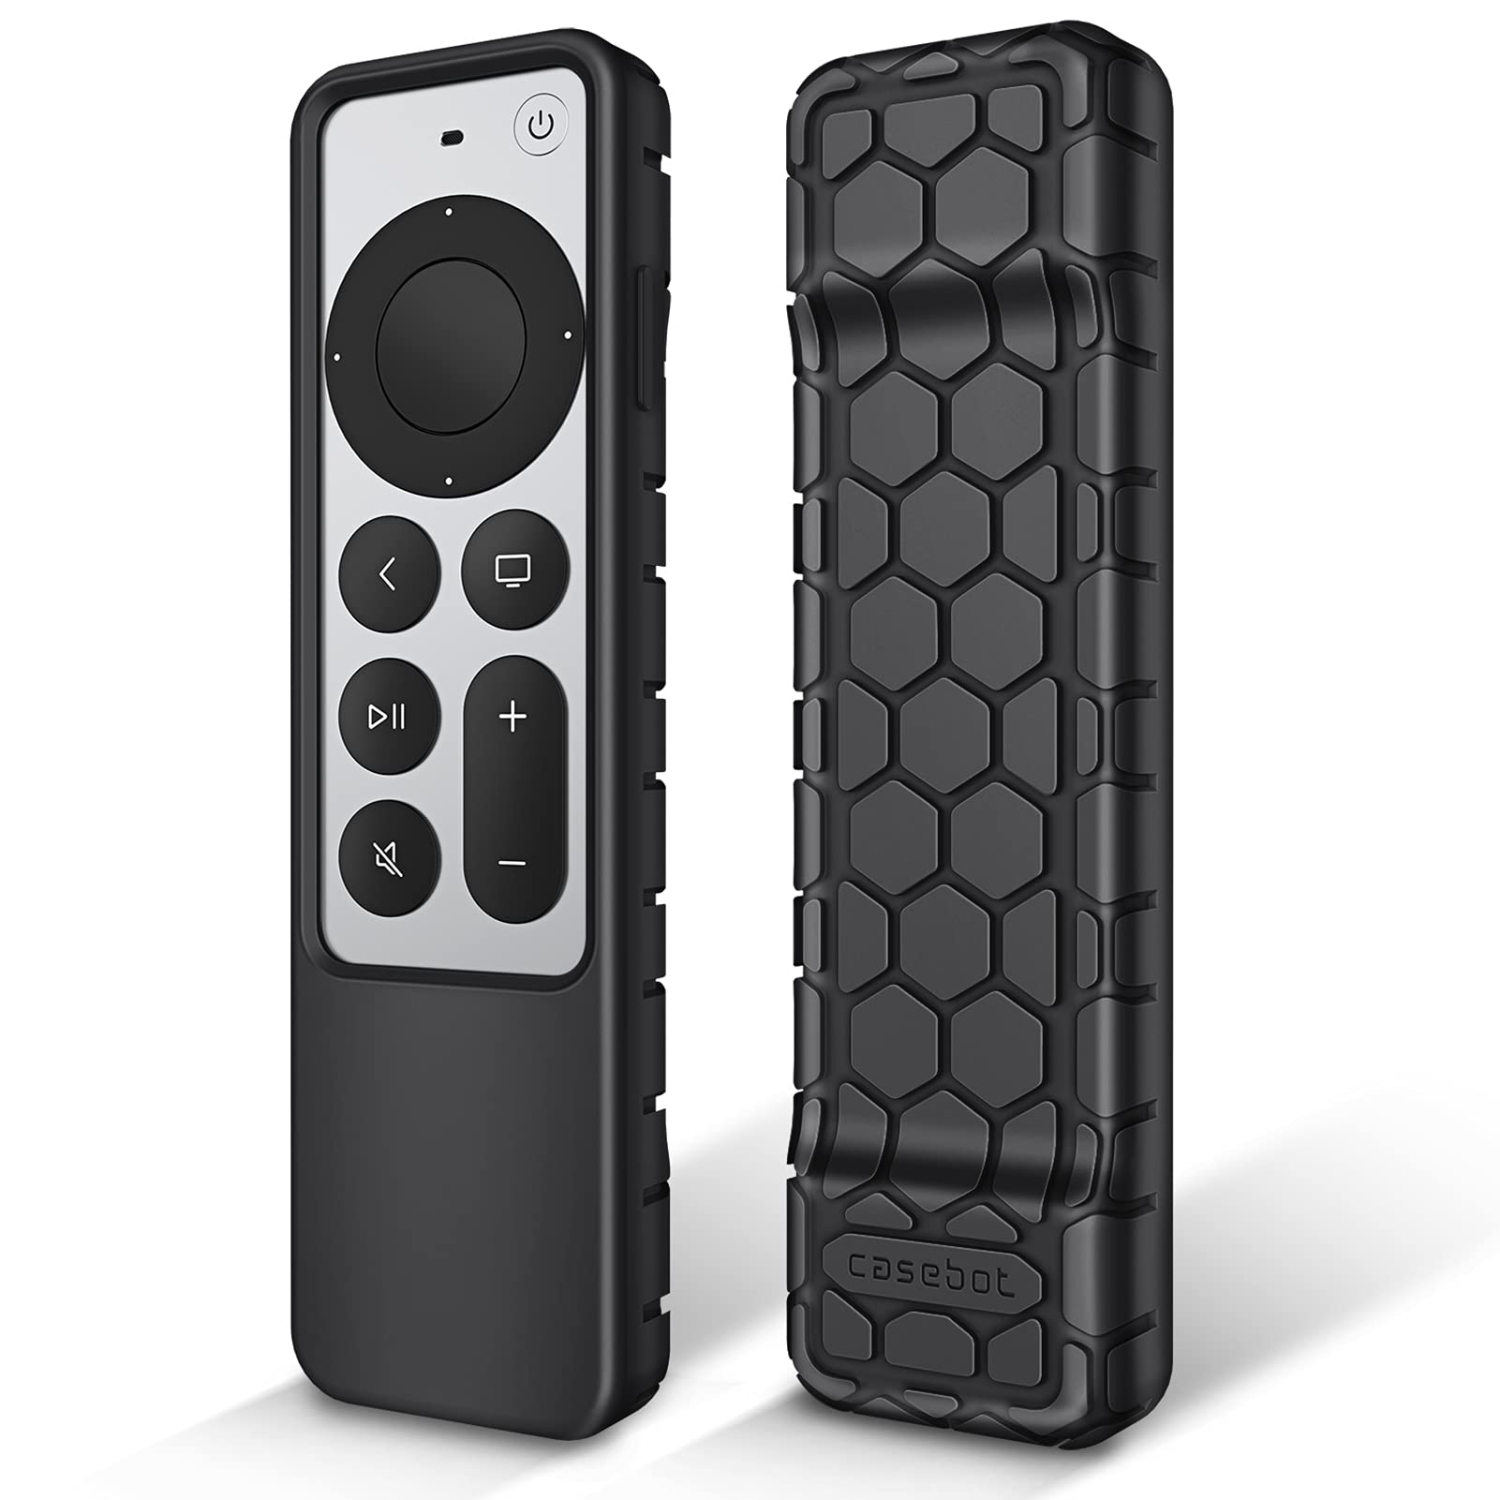 Protective Case for Apple TV Siri Remote 2021 2022 - Honey Comb Lightweight Anti Slip Shockproof Silicone Cover for Apple TV 4K / HD Siri Remote Controller (2nd Gen / 3rd Gen)